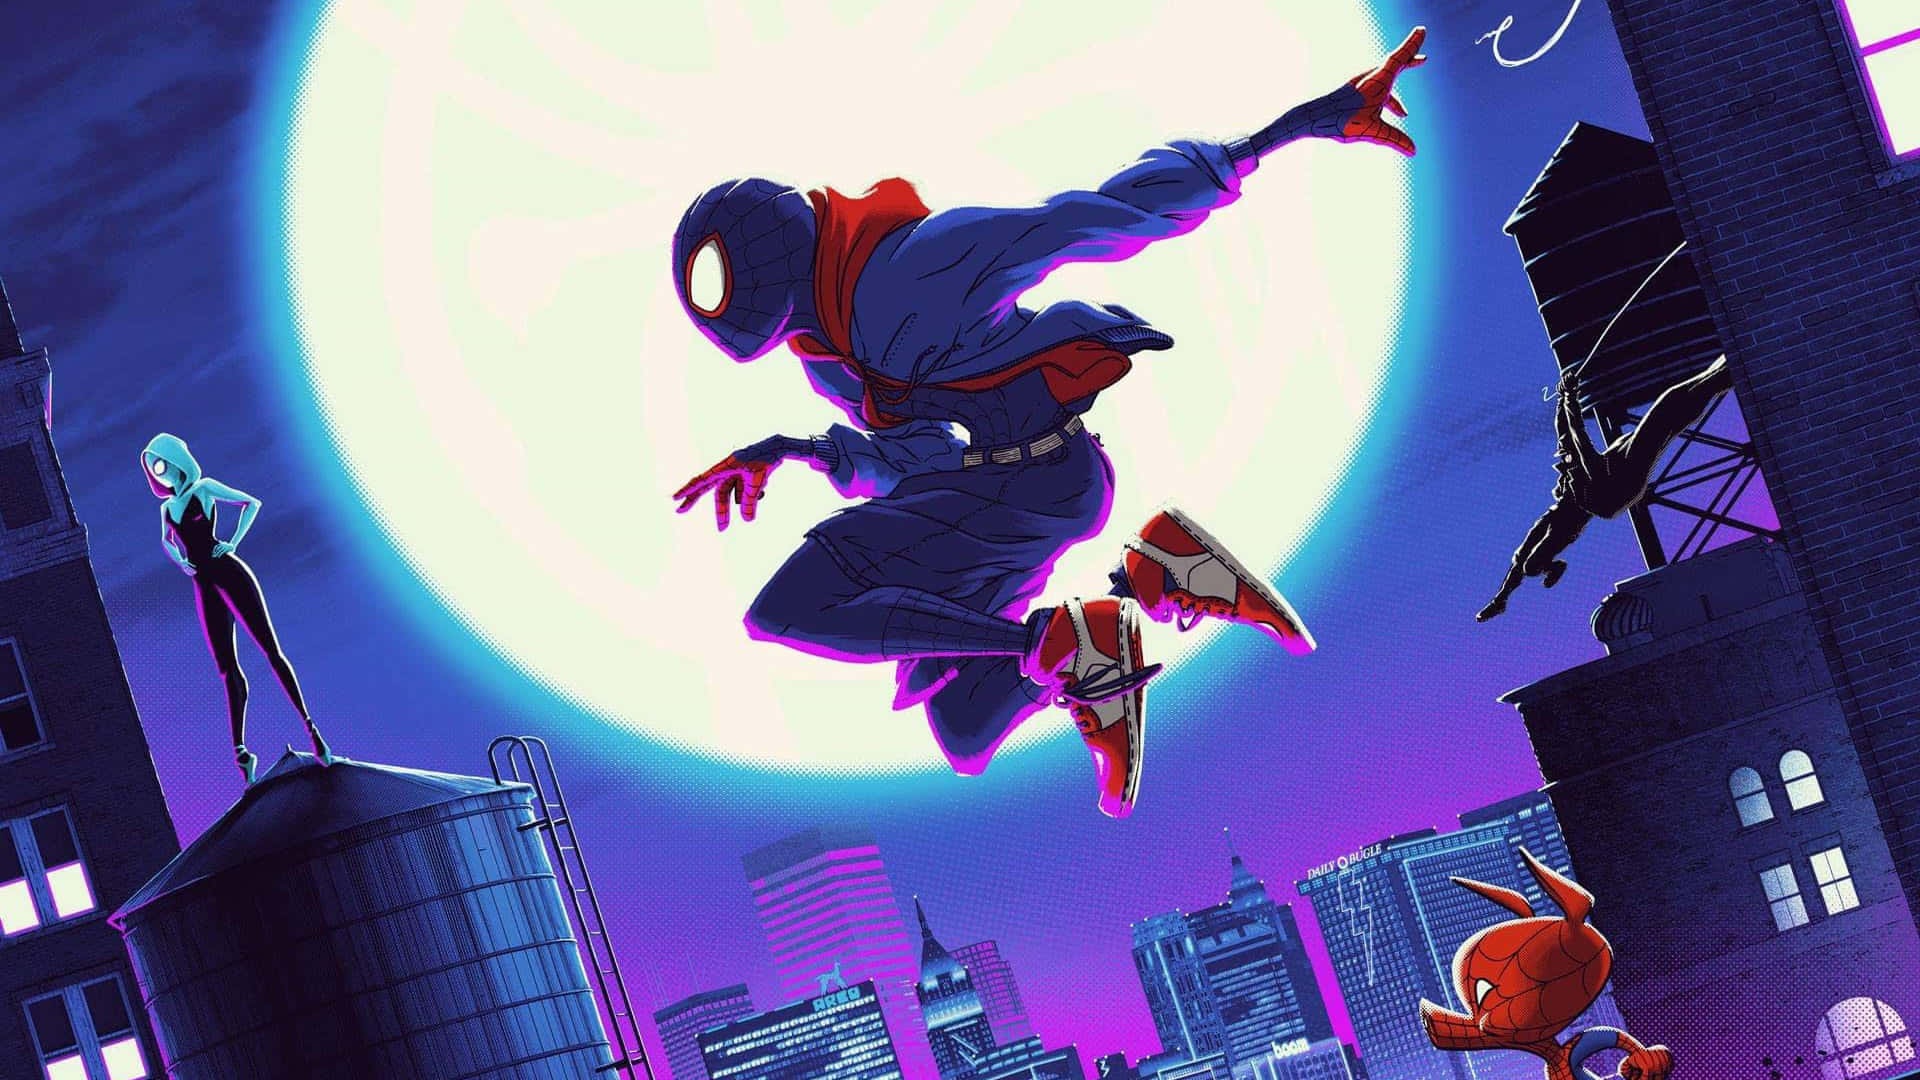 Spiderman showing off his cool moves Wallpaper